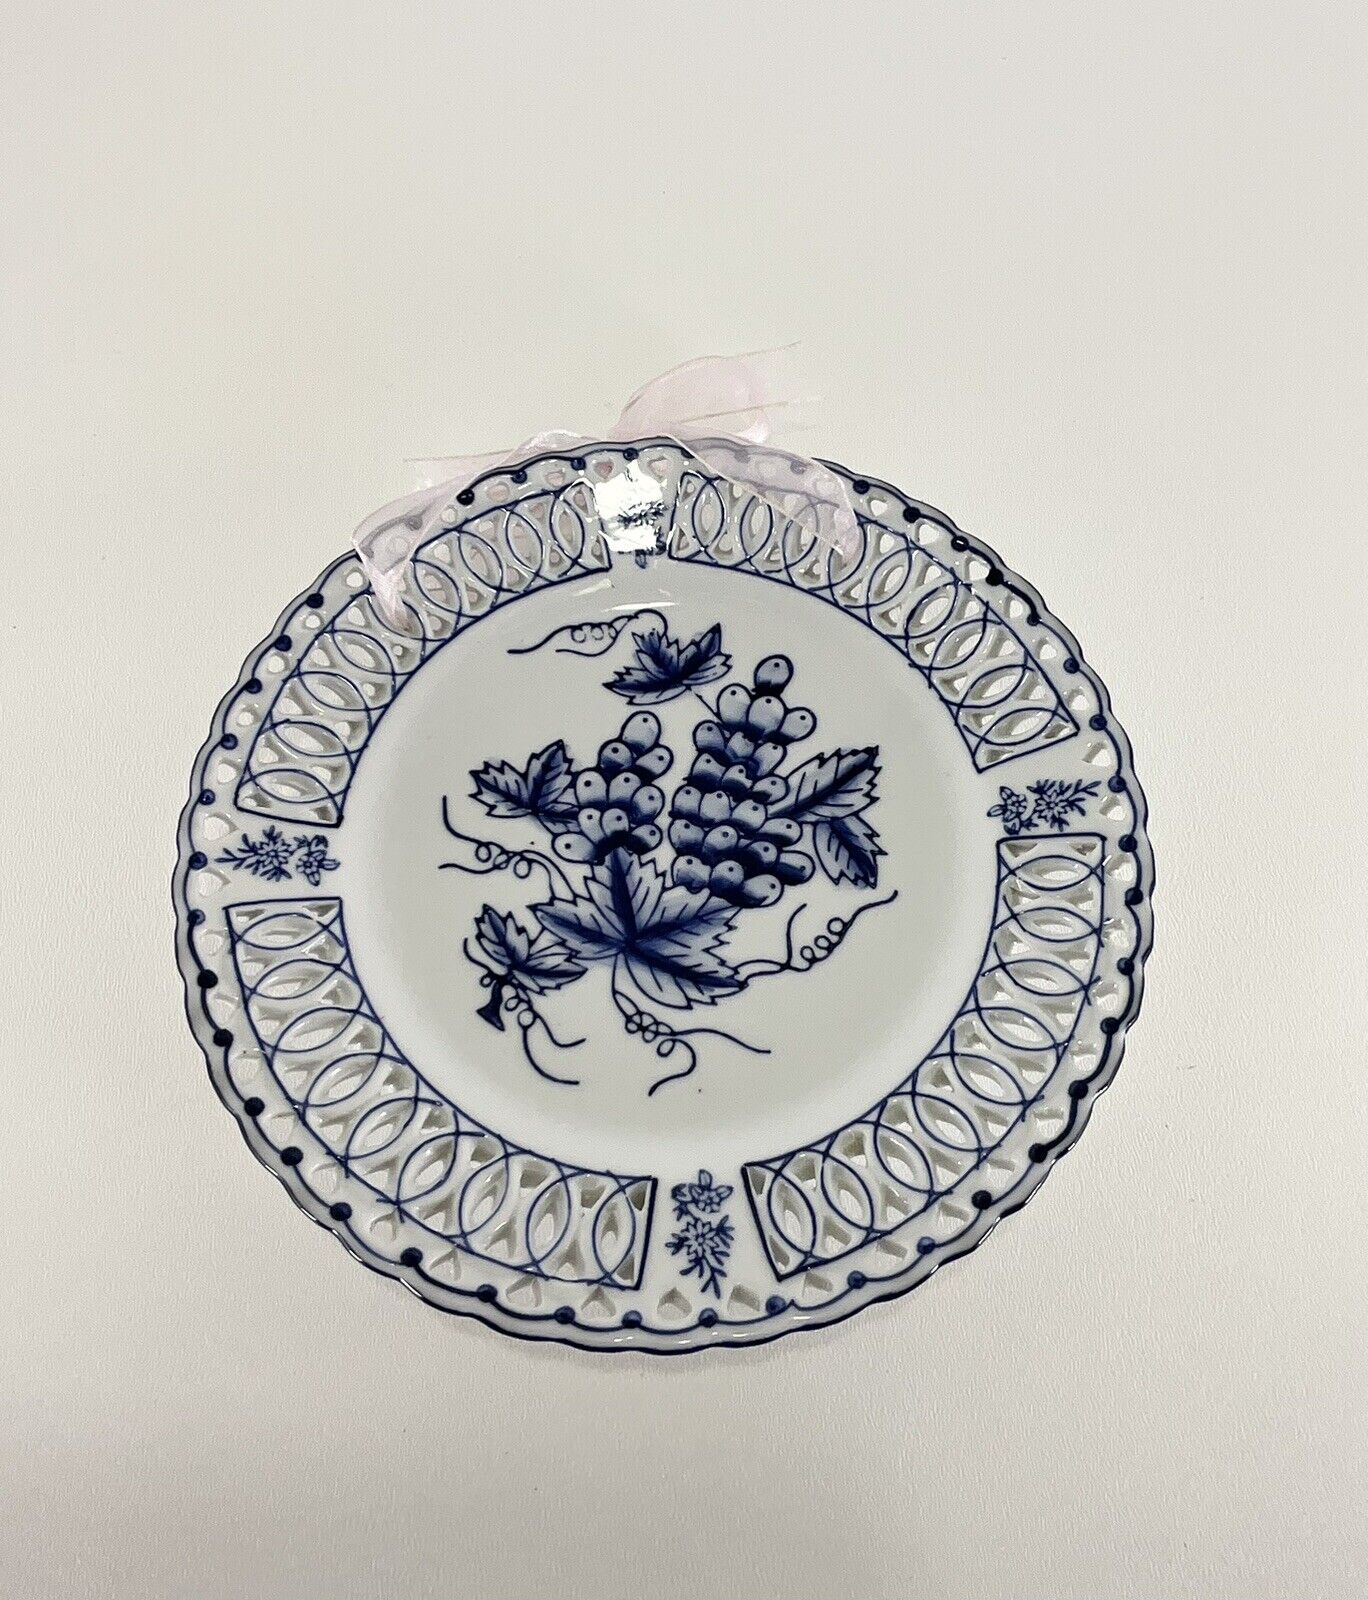 Vintage Blue And White Porcelain Reticulated Decorative Plate With Fruit &Ribbon